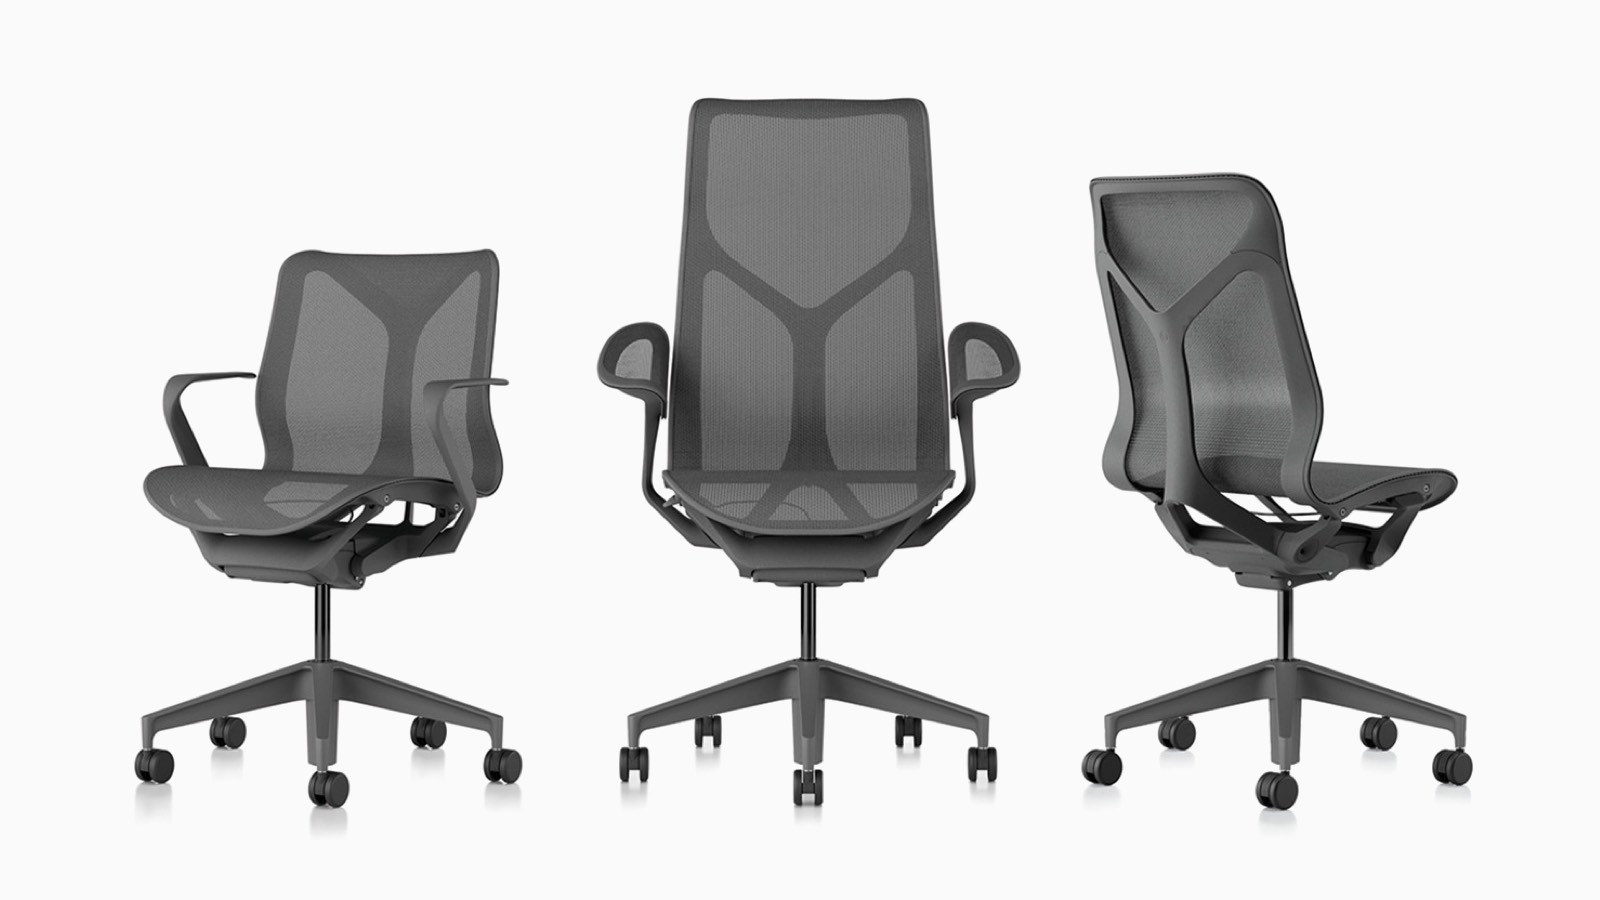 Low-back, high-back, and mid-back Cosm ergonomic desk chairs with suspension materials, bases, and frames in Carbon grey.